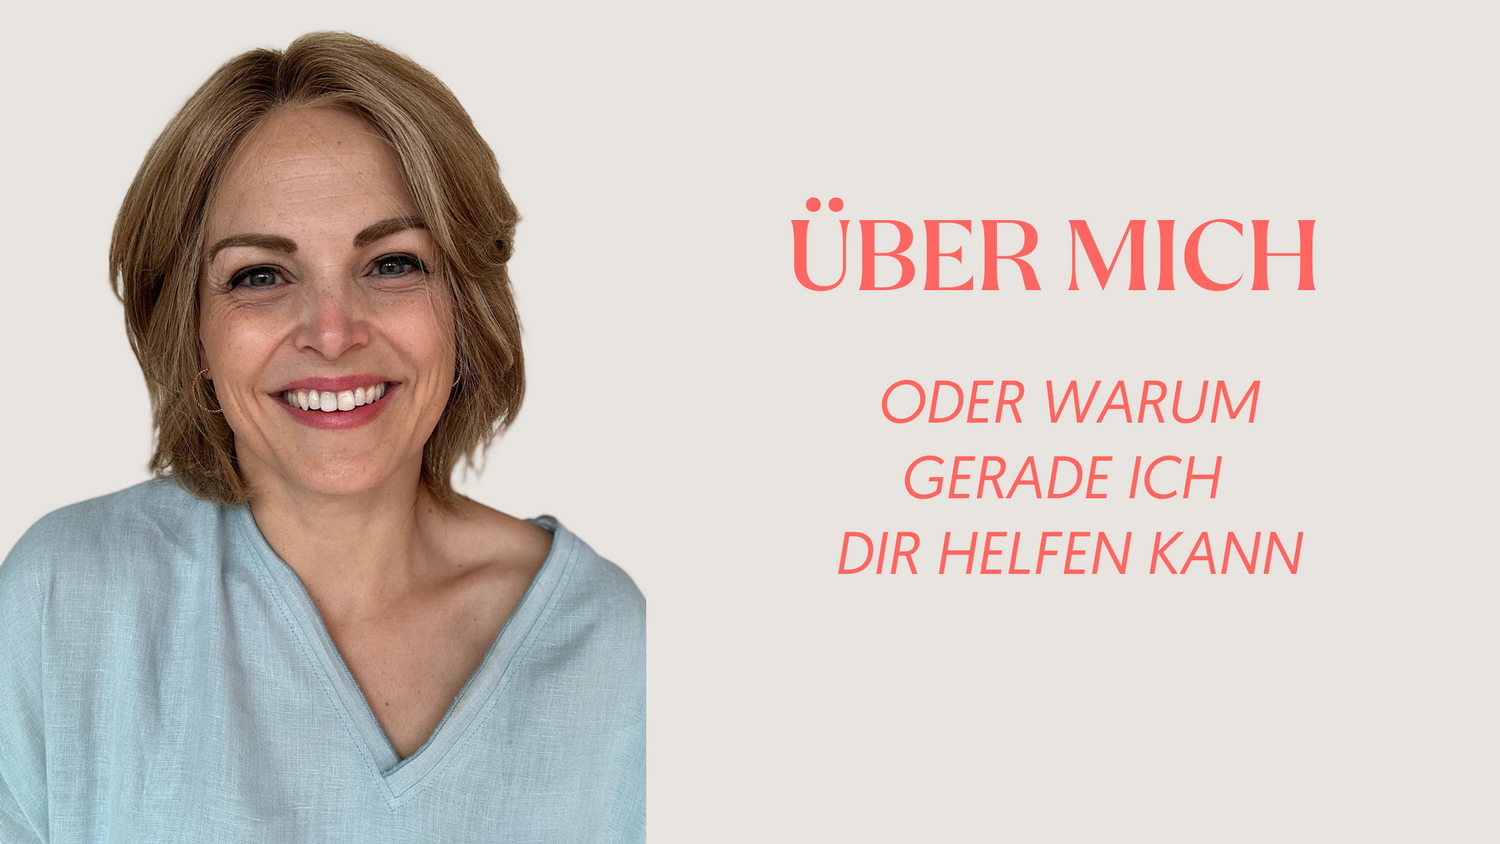 Über mich - About me